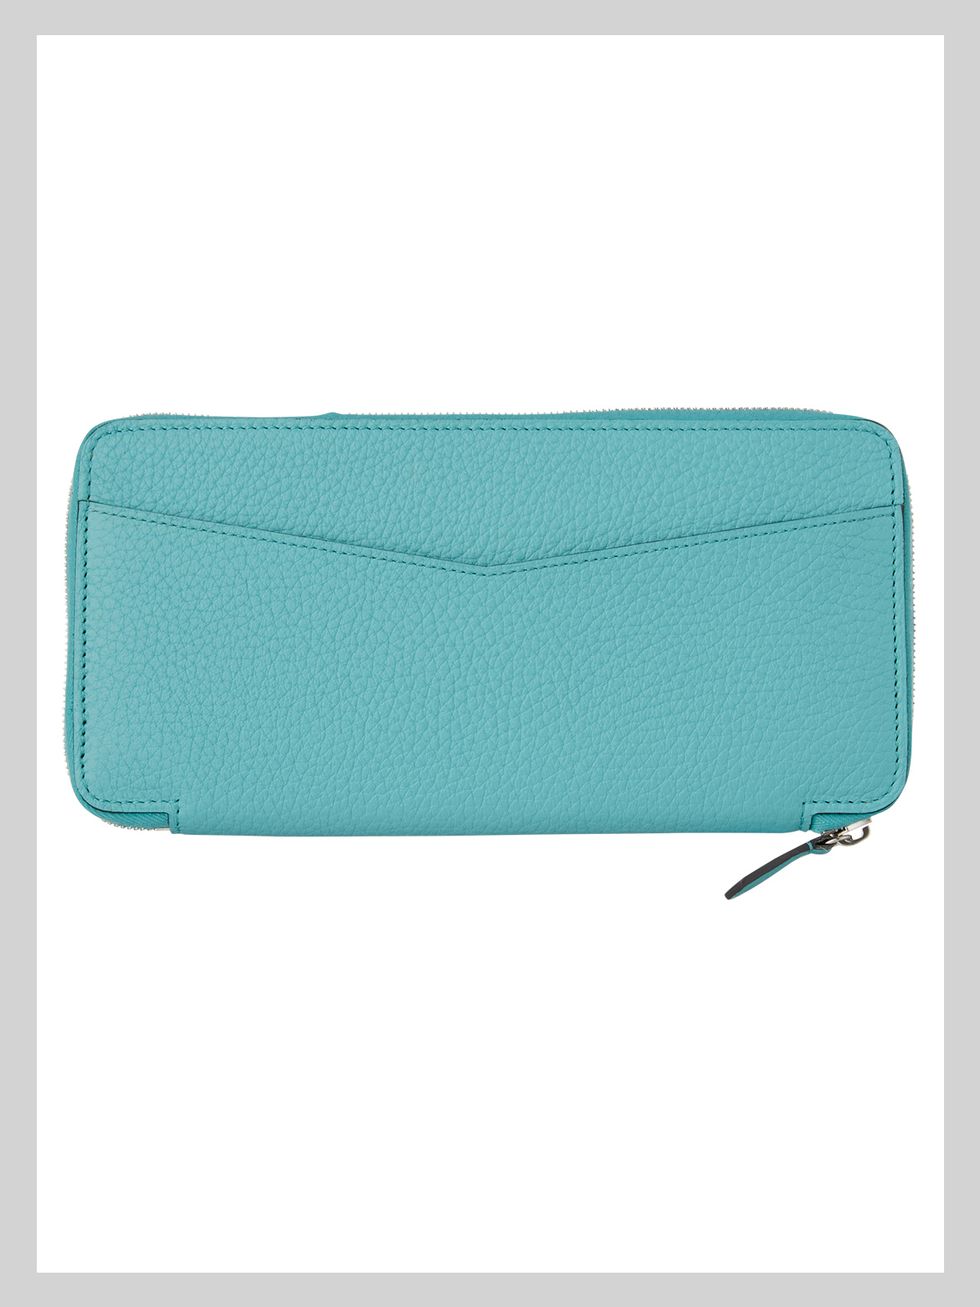 Teal, Turquoise, Rectangle, Bag, Musical instrument accessory, Zipper, Baggage, 